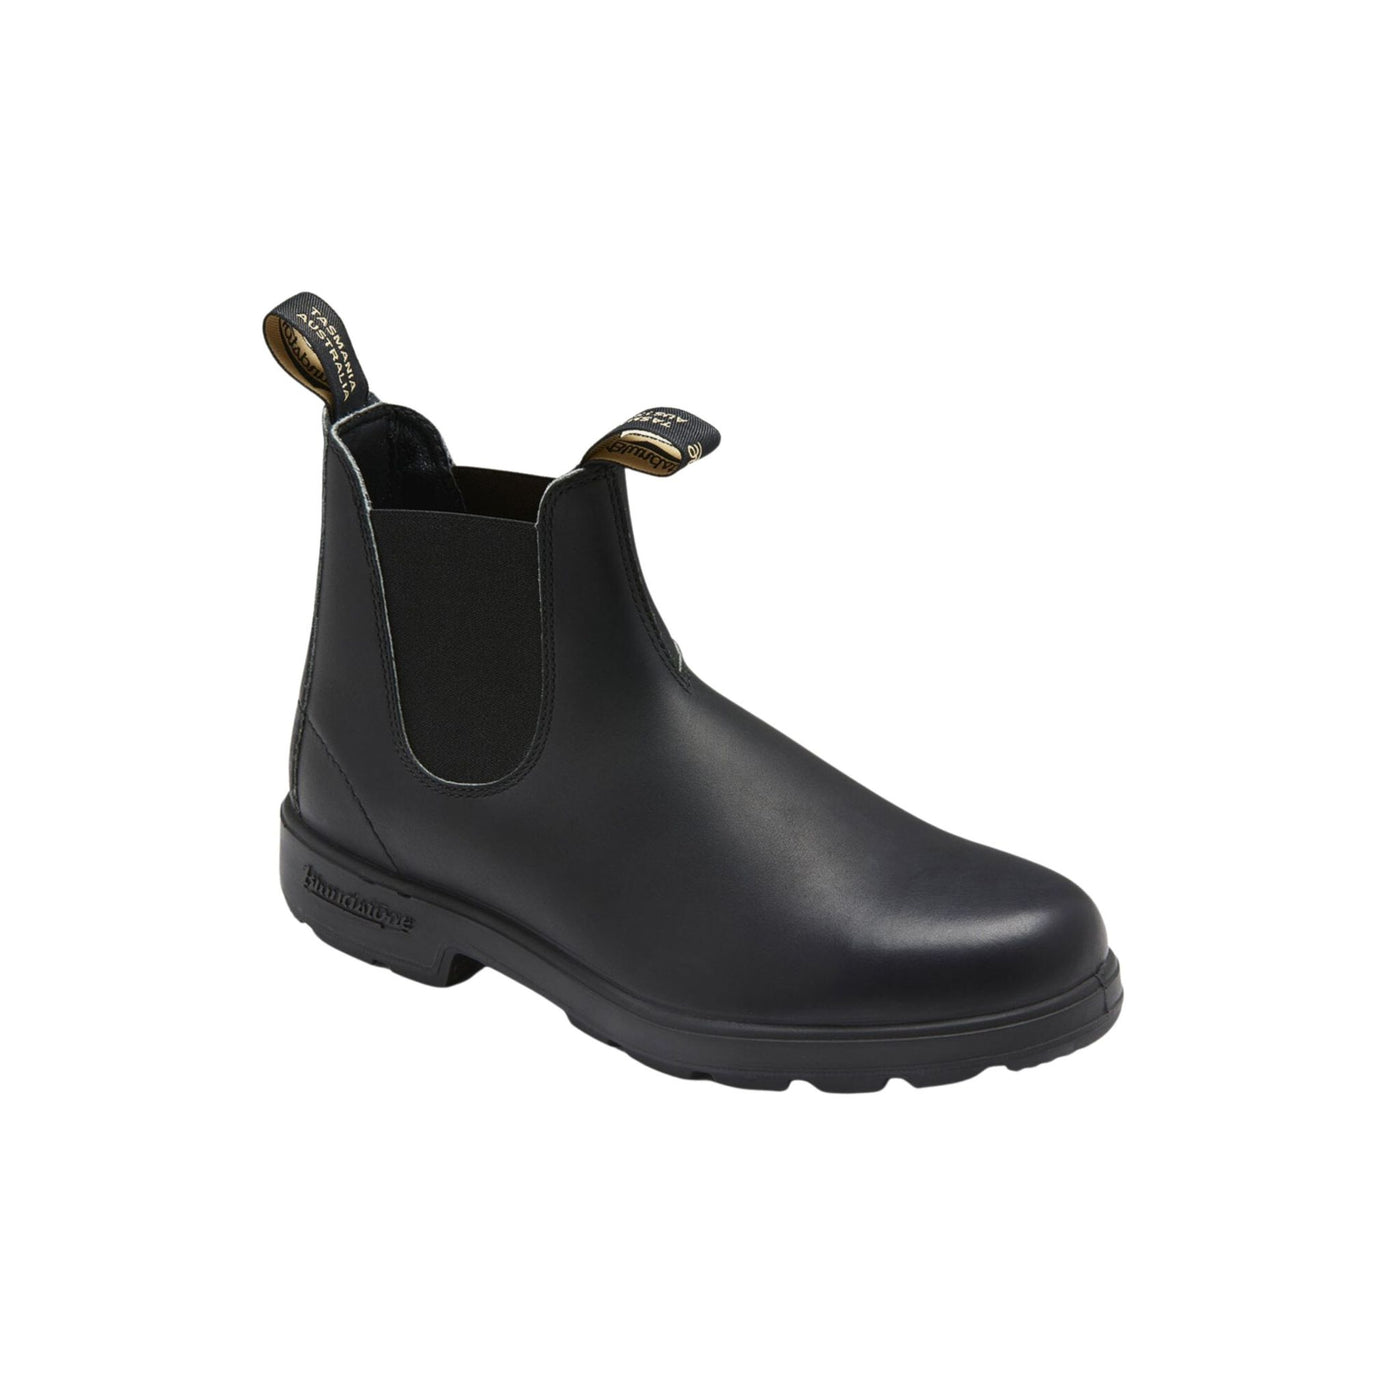 Black men's ankle boot in smooth leather